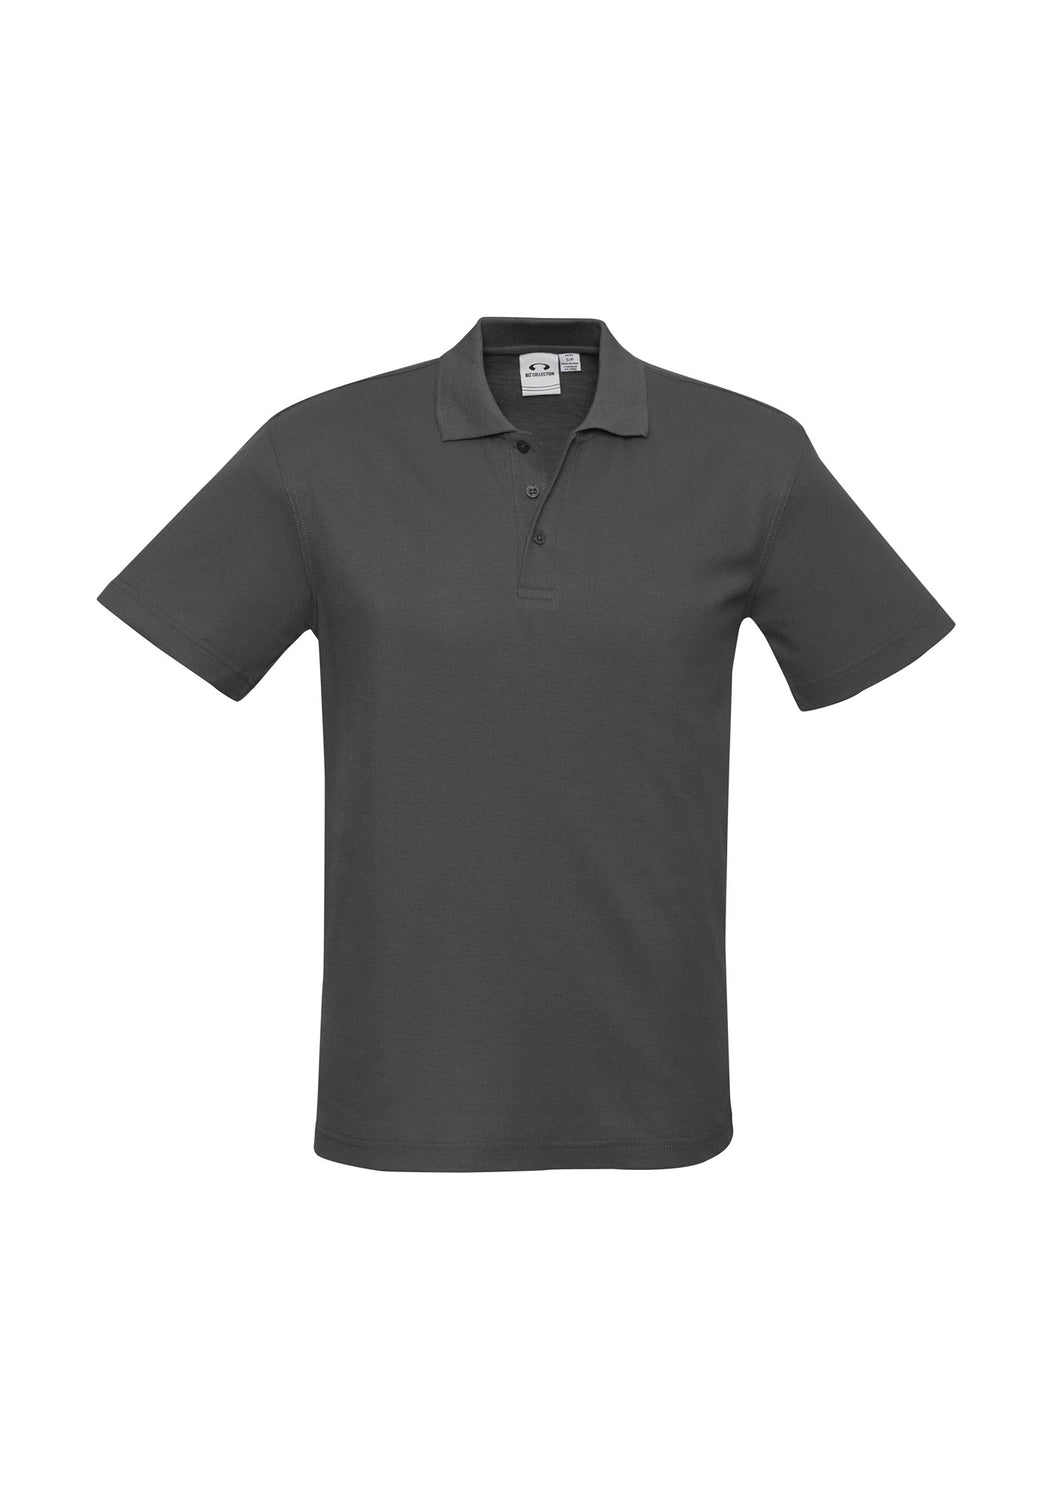 Kids Classic Pique Knit Polo - Charcoal